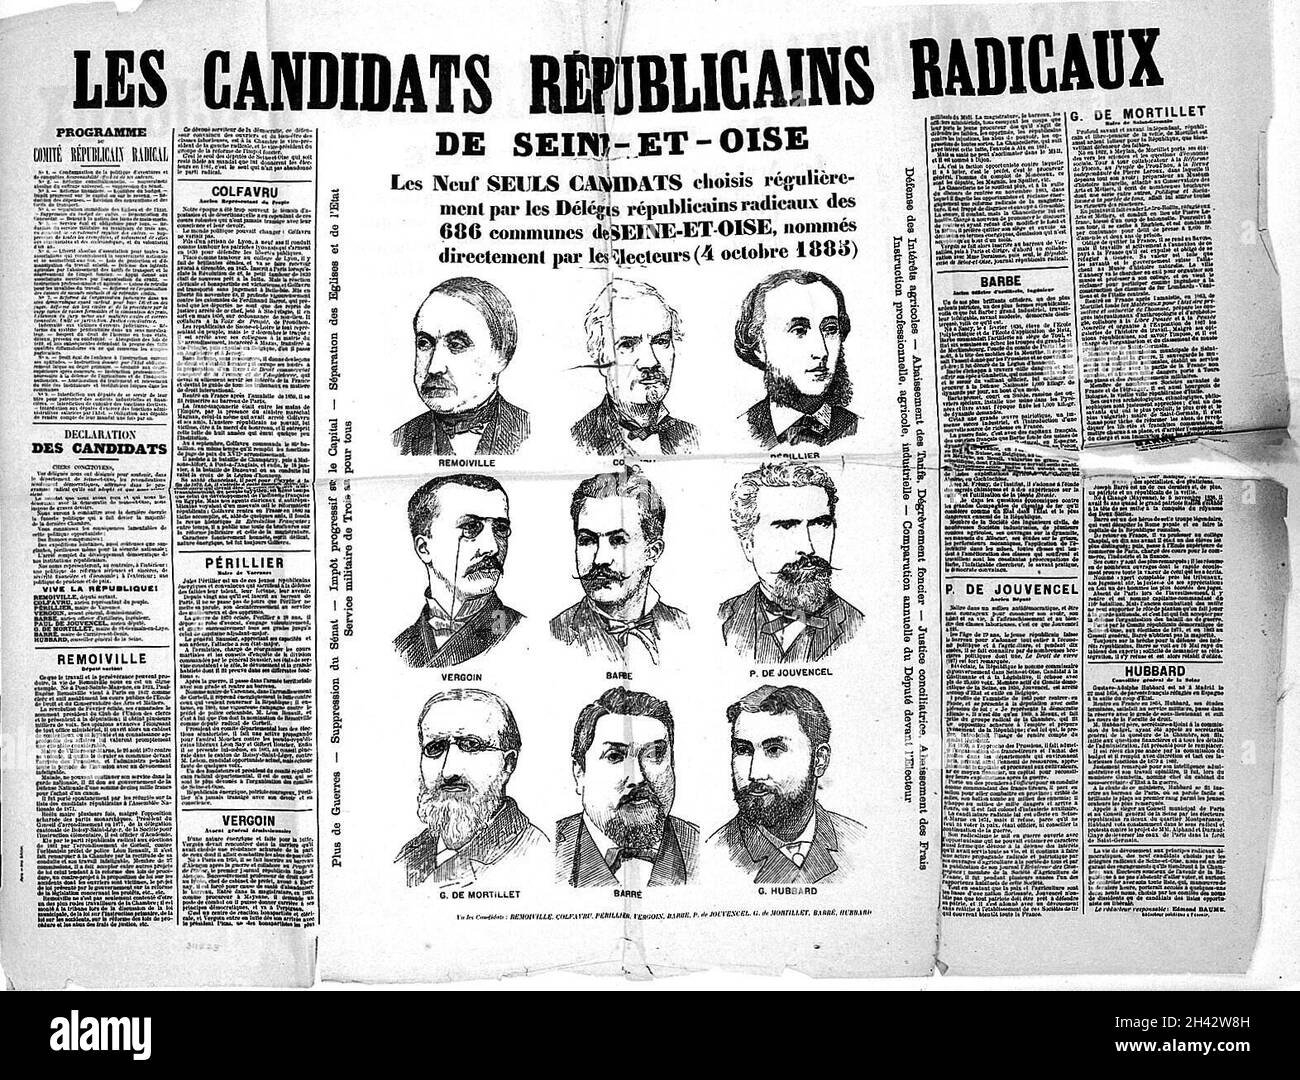 Newspaper advertisement, 'Les candidats republicains radicaux' with biography and woodcut portrait of G. de Mortillet. Stock Photo